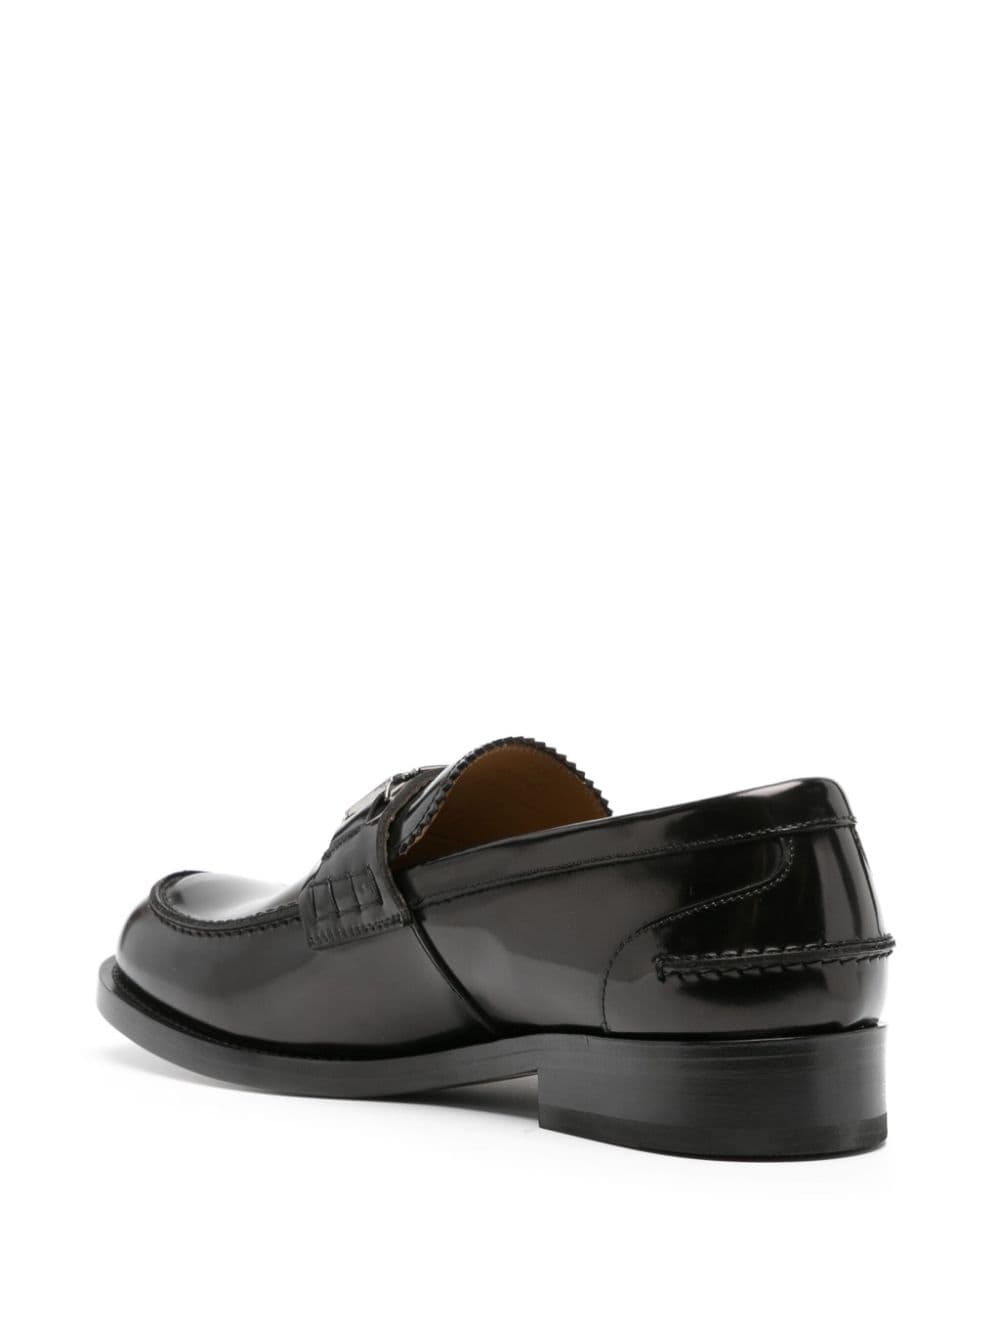 Greca patent leather loafers - 3